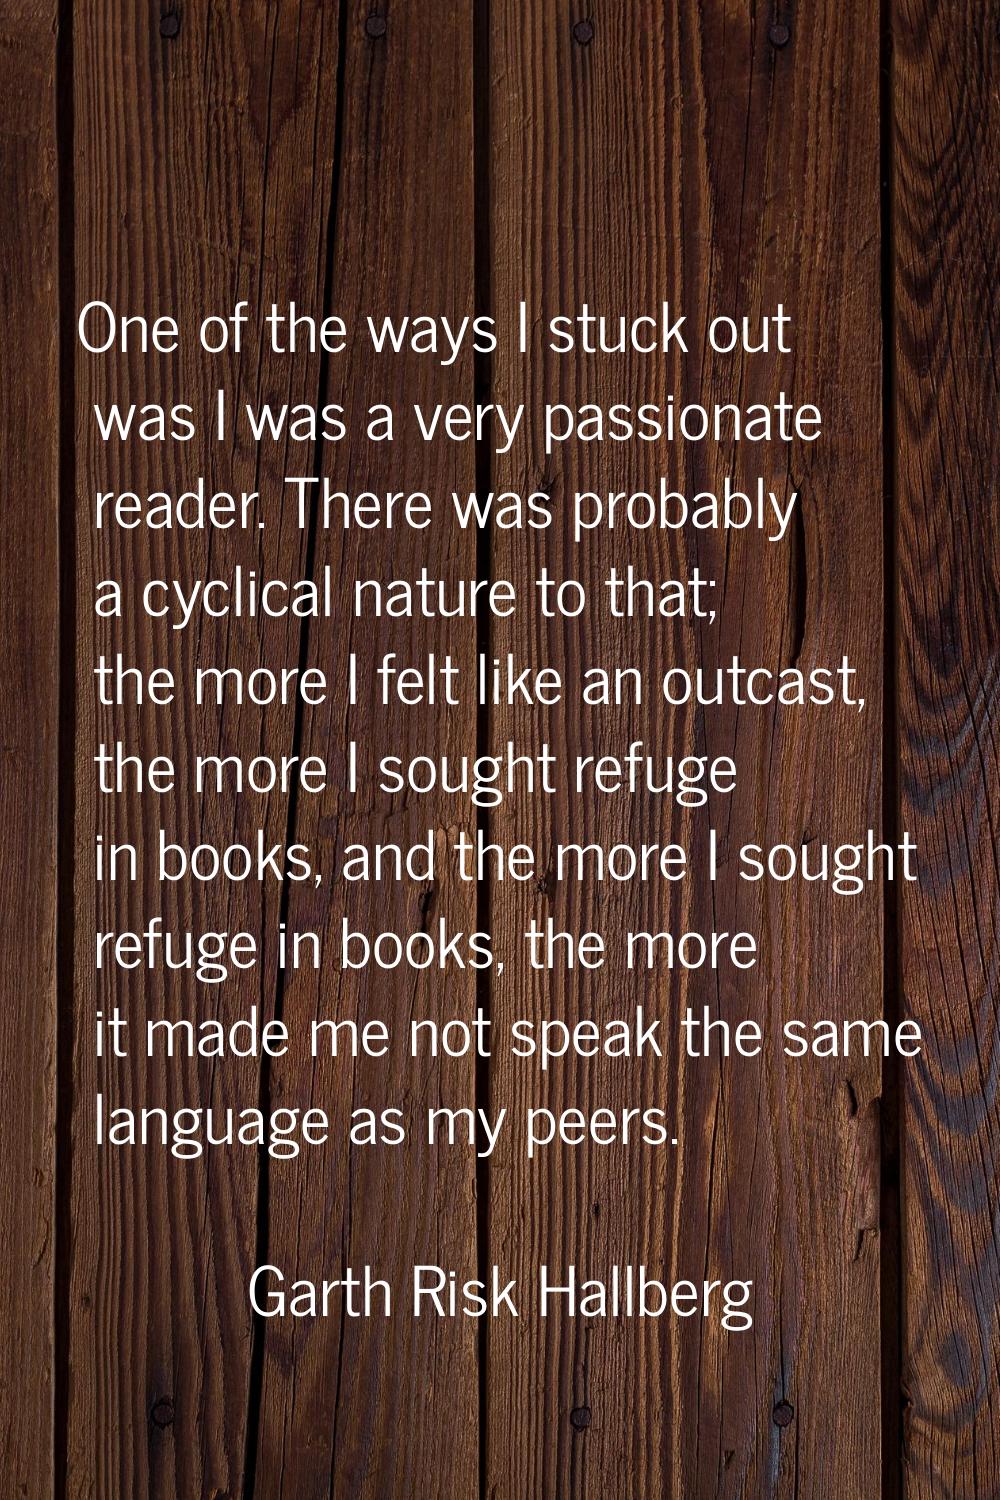 One of the ways I stuck out was I was a very passionate reader. There was probably a cyclical natur